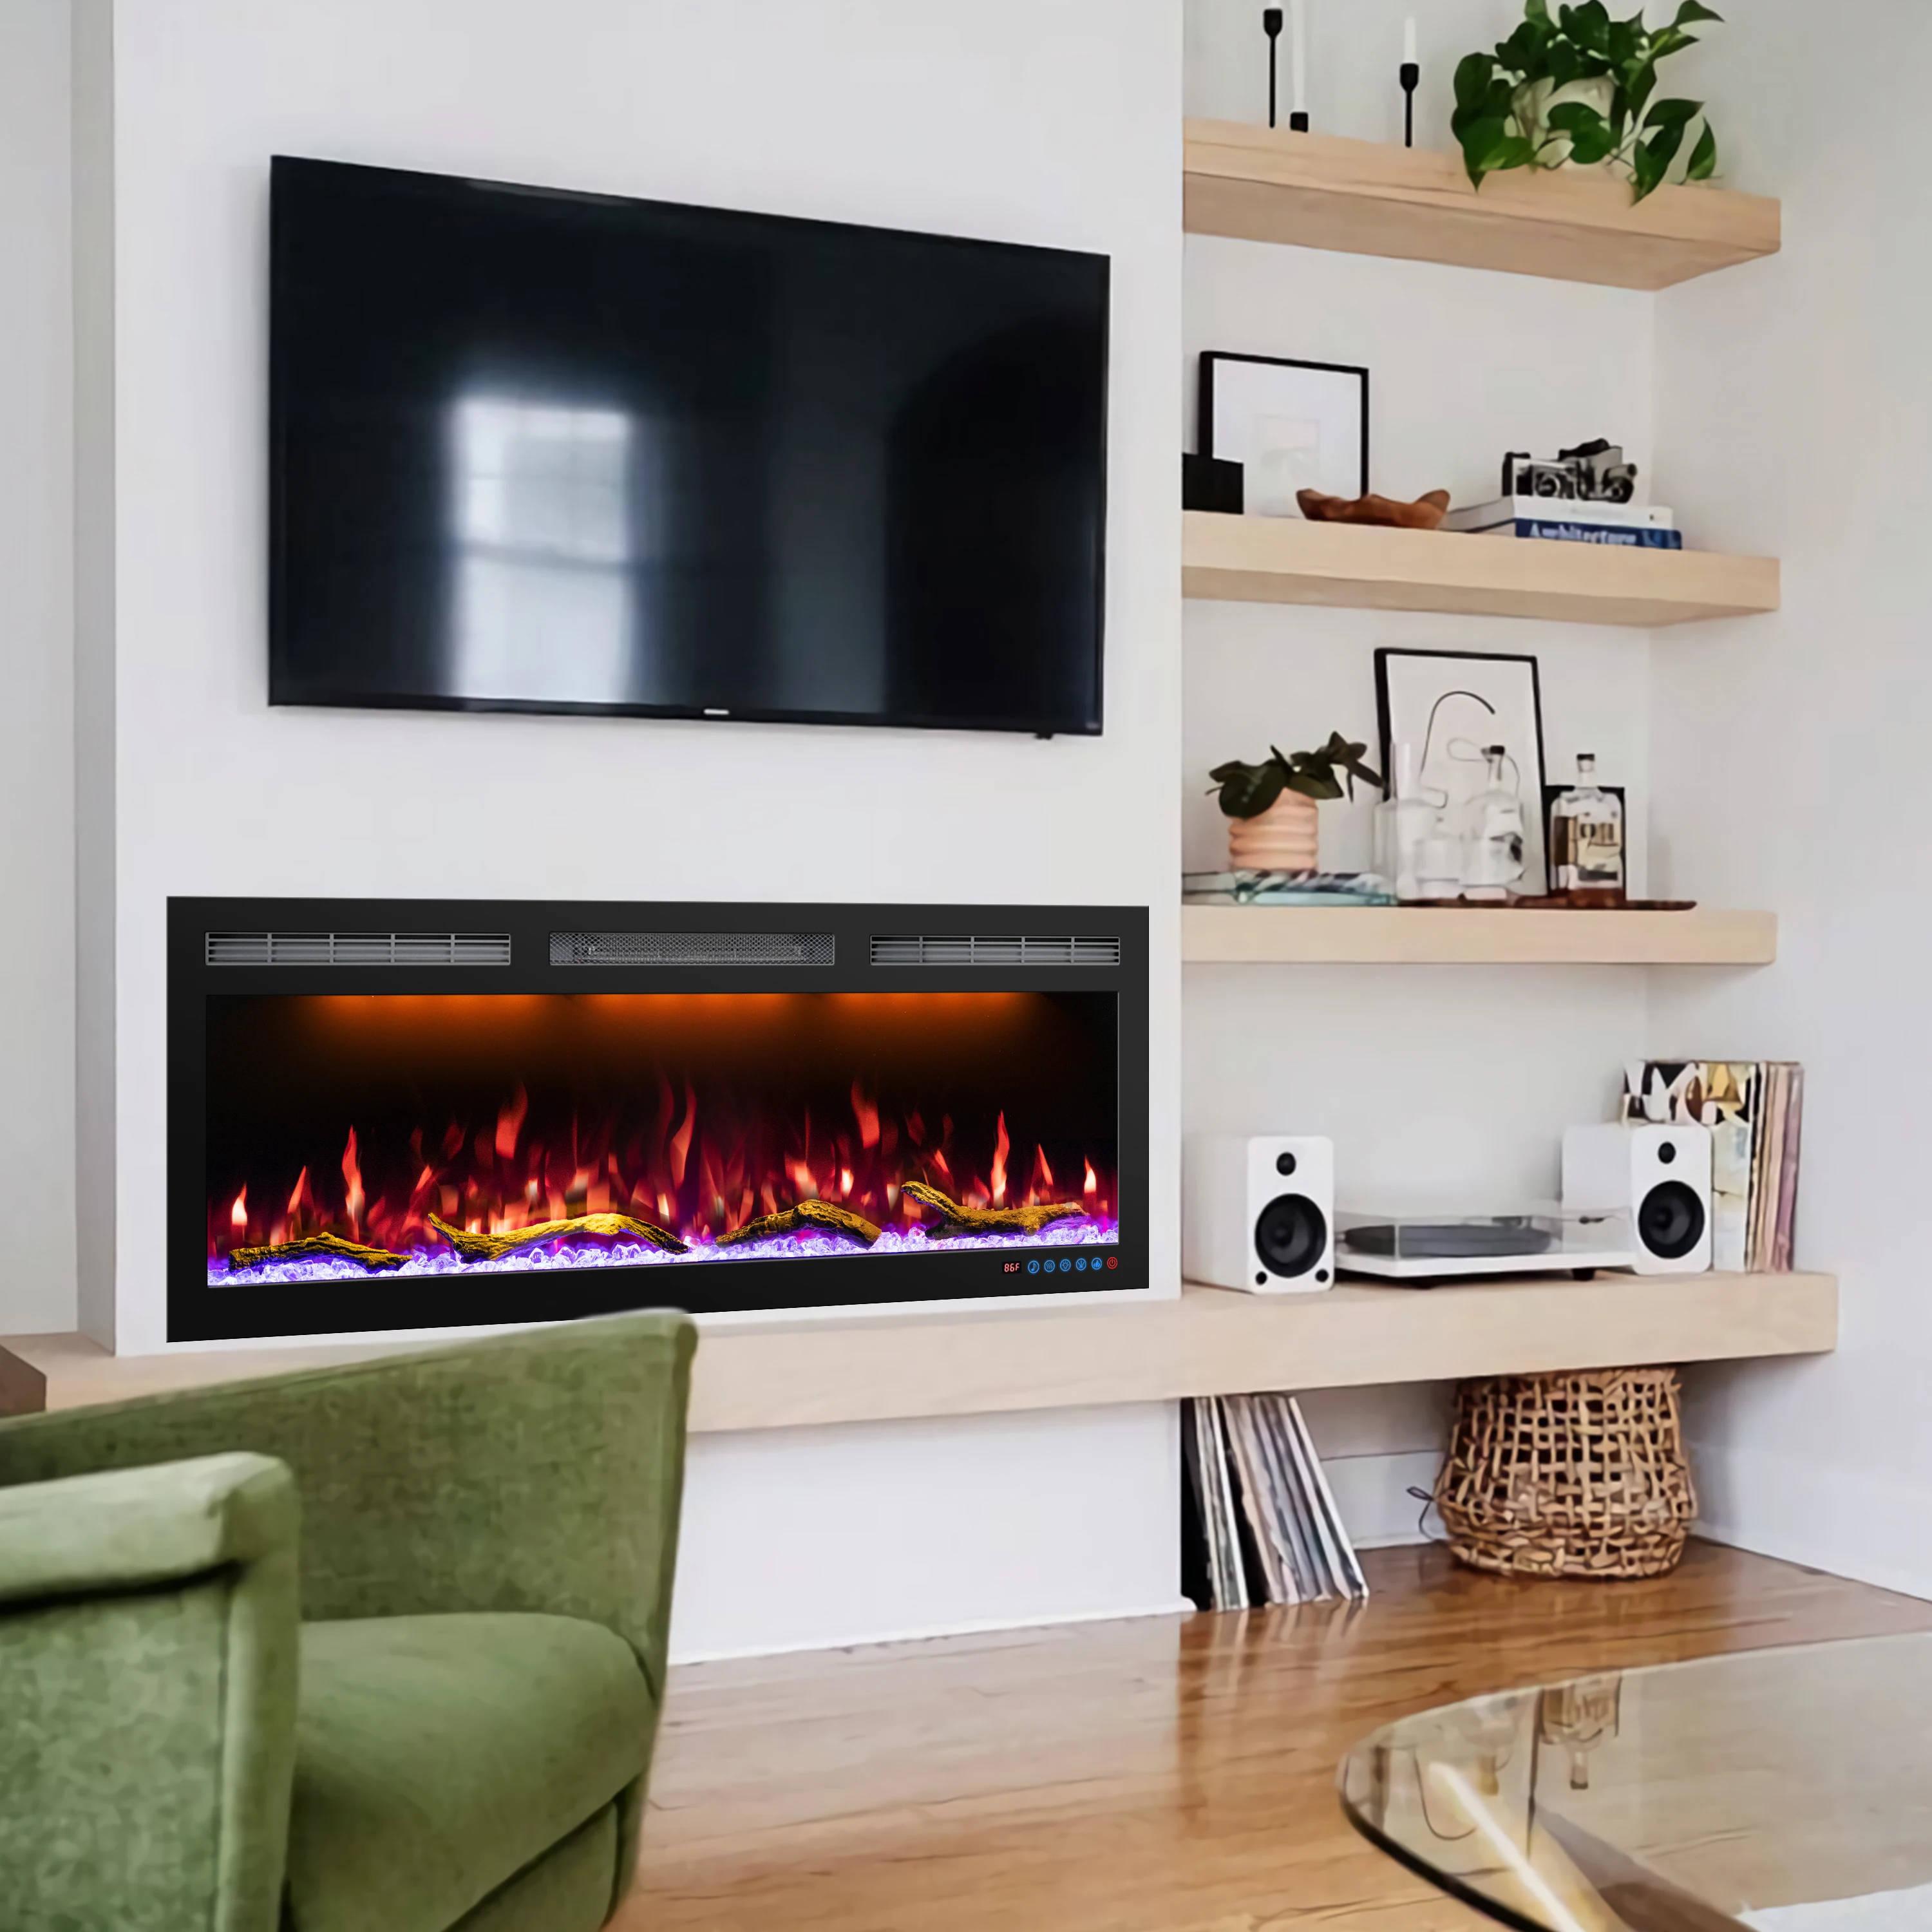 50" Wholesale Recessed WiFi-Enabled Electric Fireplace Inserts Electric Hearth with Thermostat Slim Frame Alexa APP Control